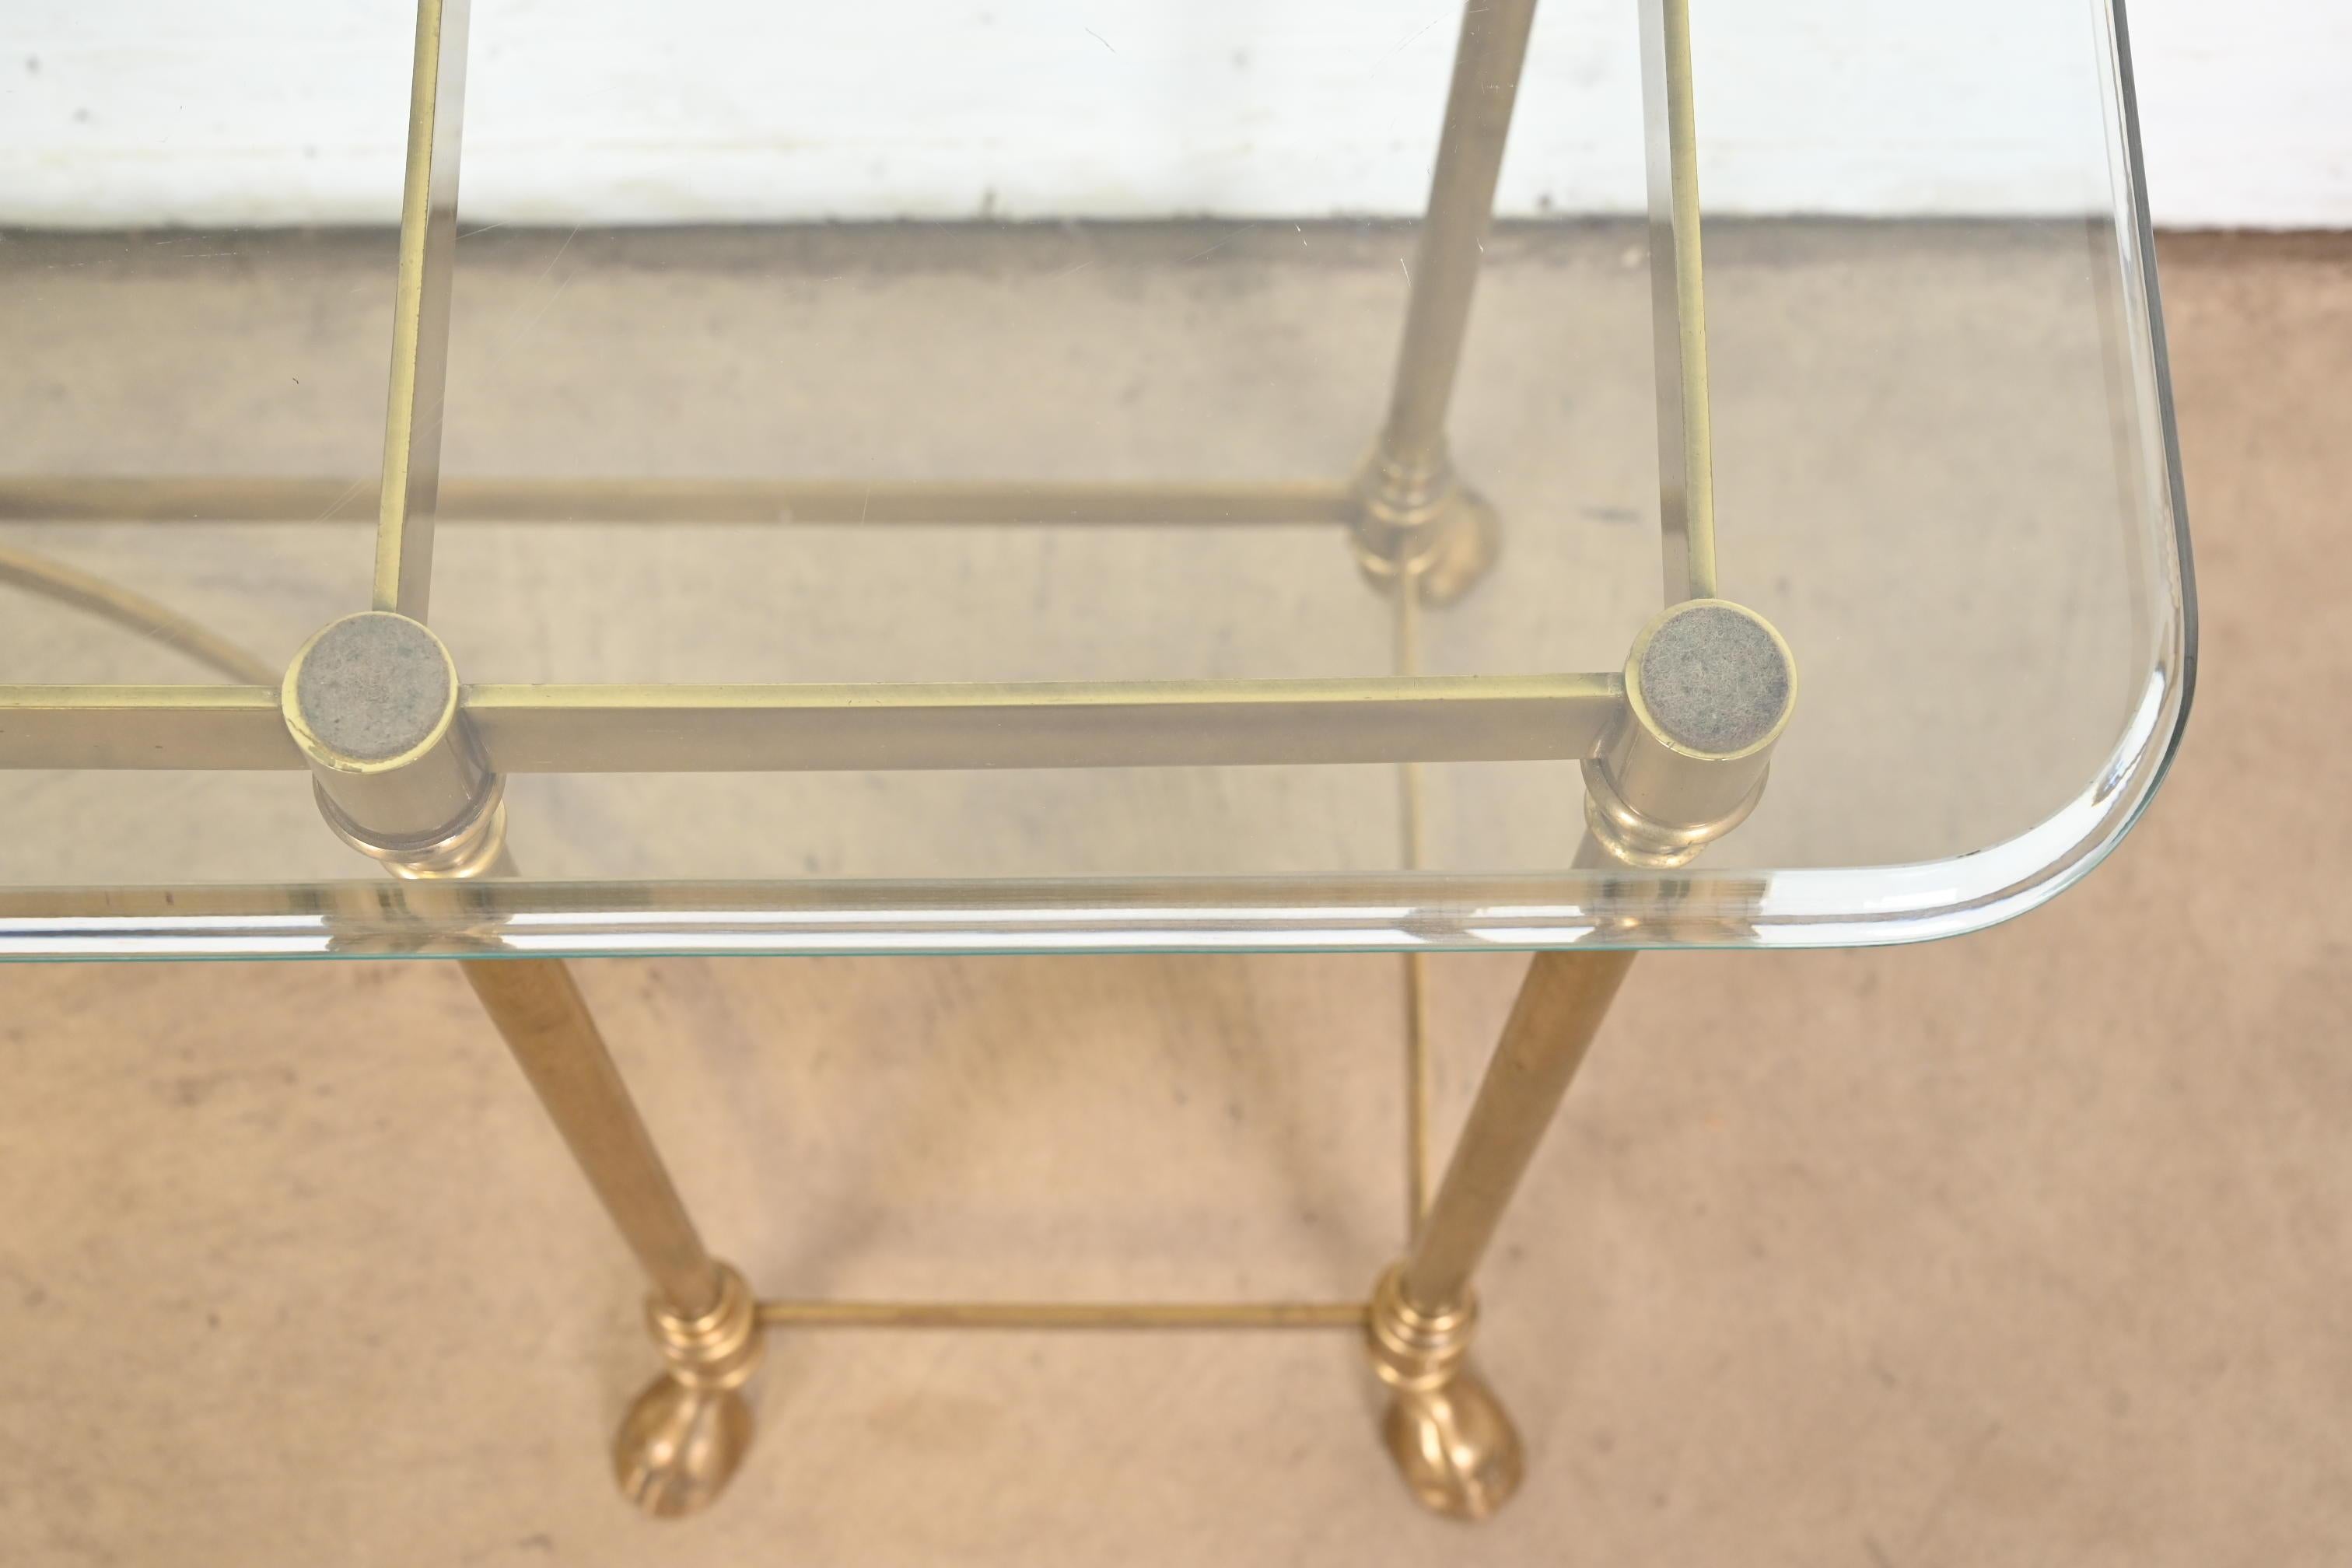 Labarge Hollywood Regency Brass and Glass Hooved Feet Console Table, Circa 1960s For Sale 6